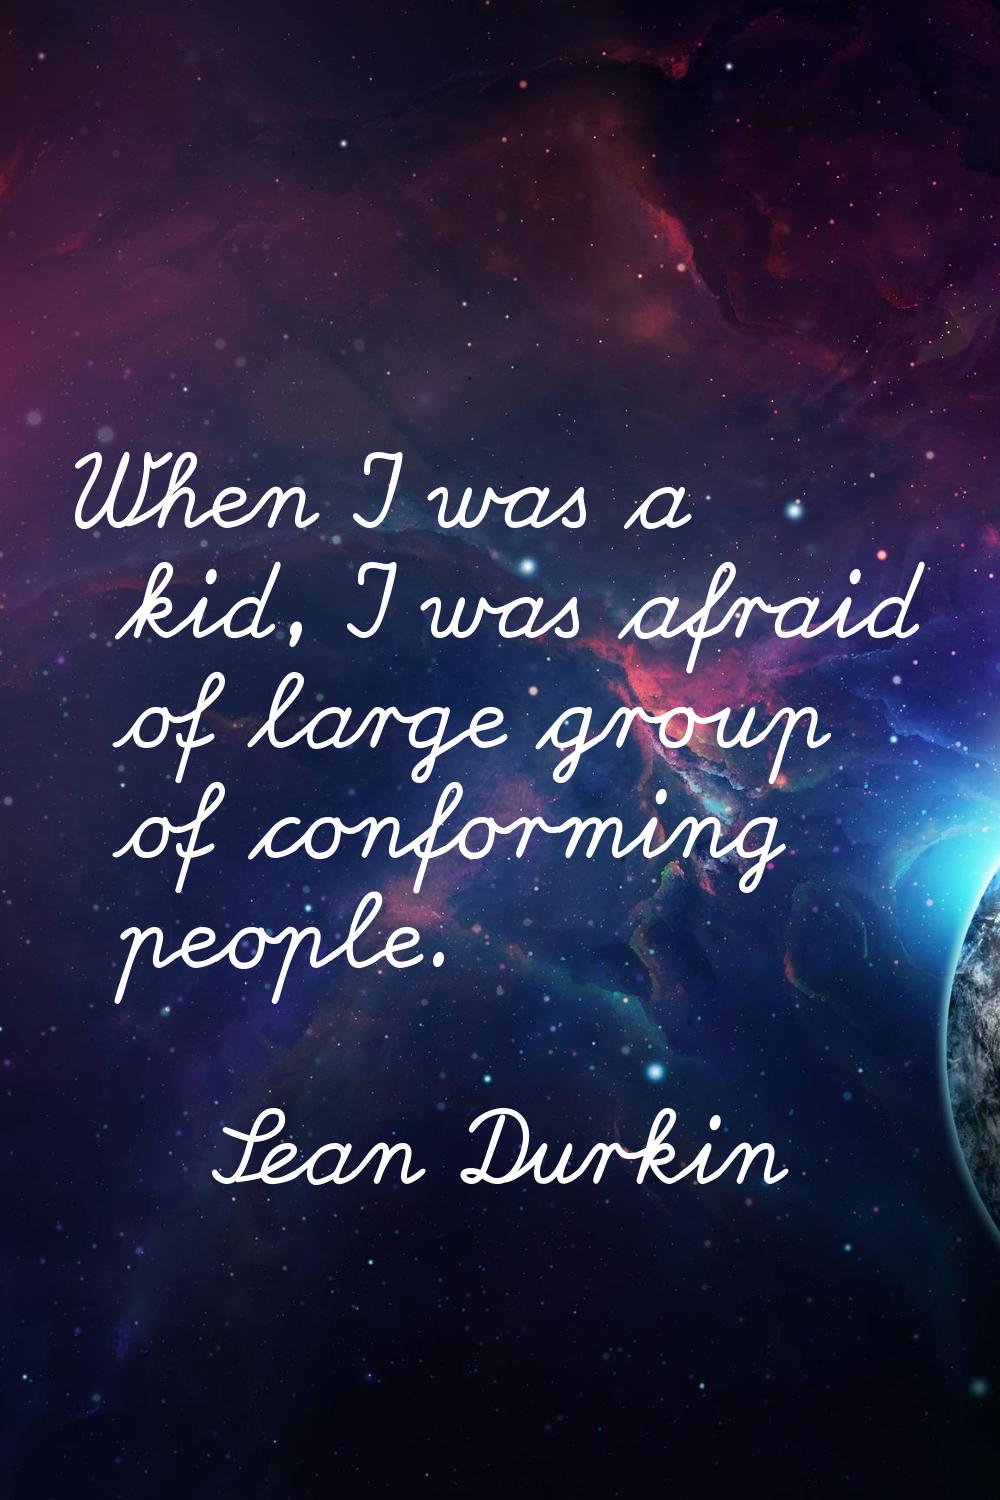 When I was a kid, I was afraid of large group of conforming people.